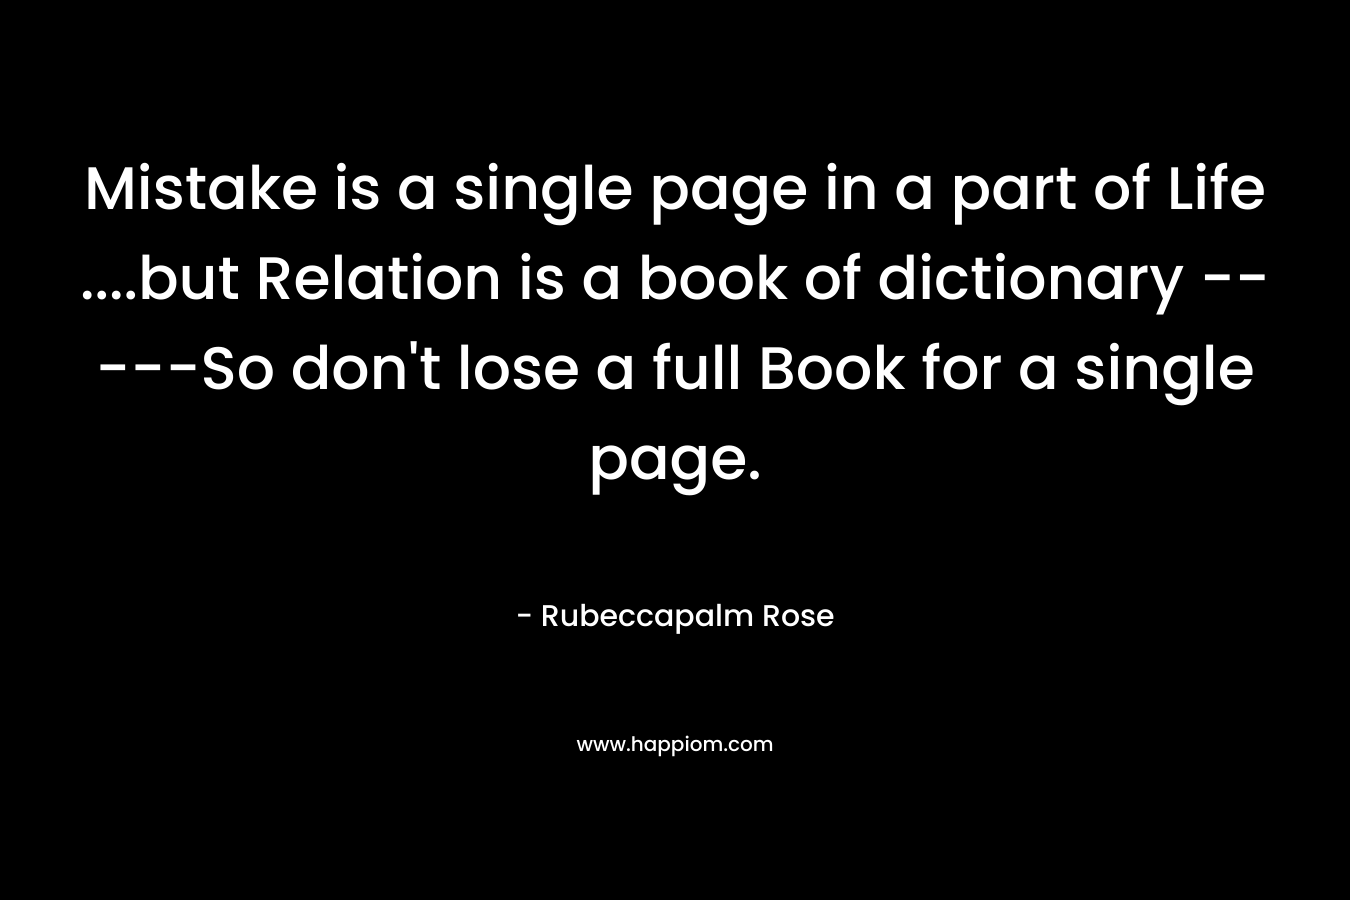 Mistake is a single page in a part of Life ....but Relation is a book of dictionary -----So don't lose a full Book for a single page.